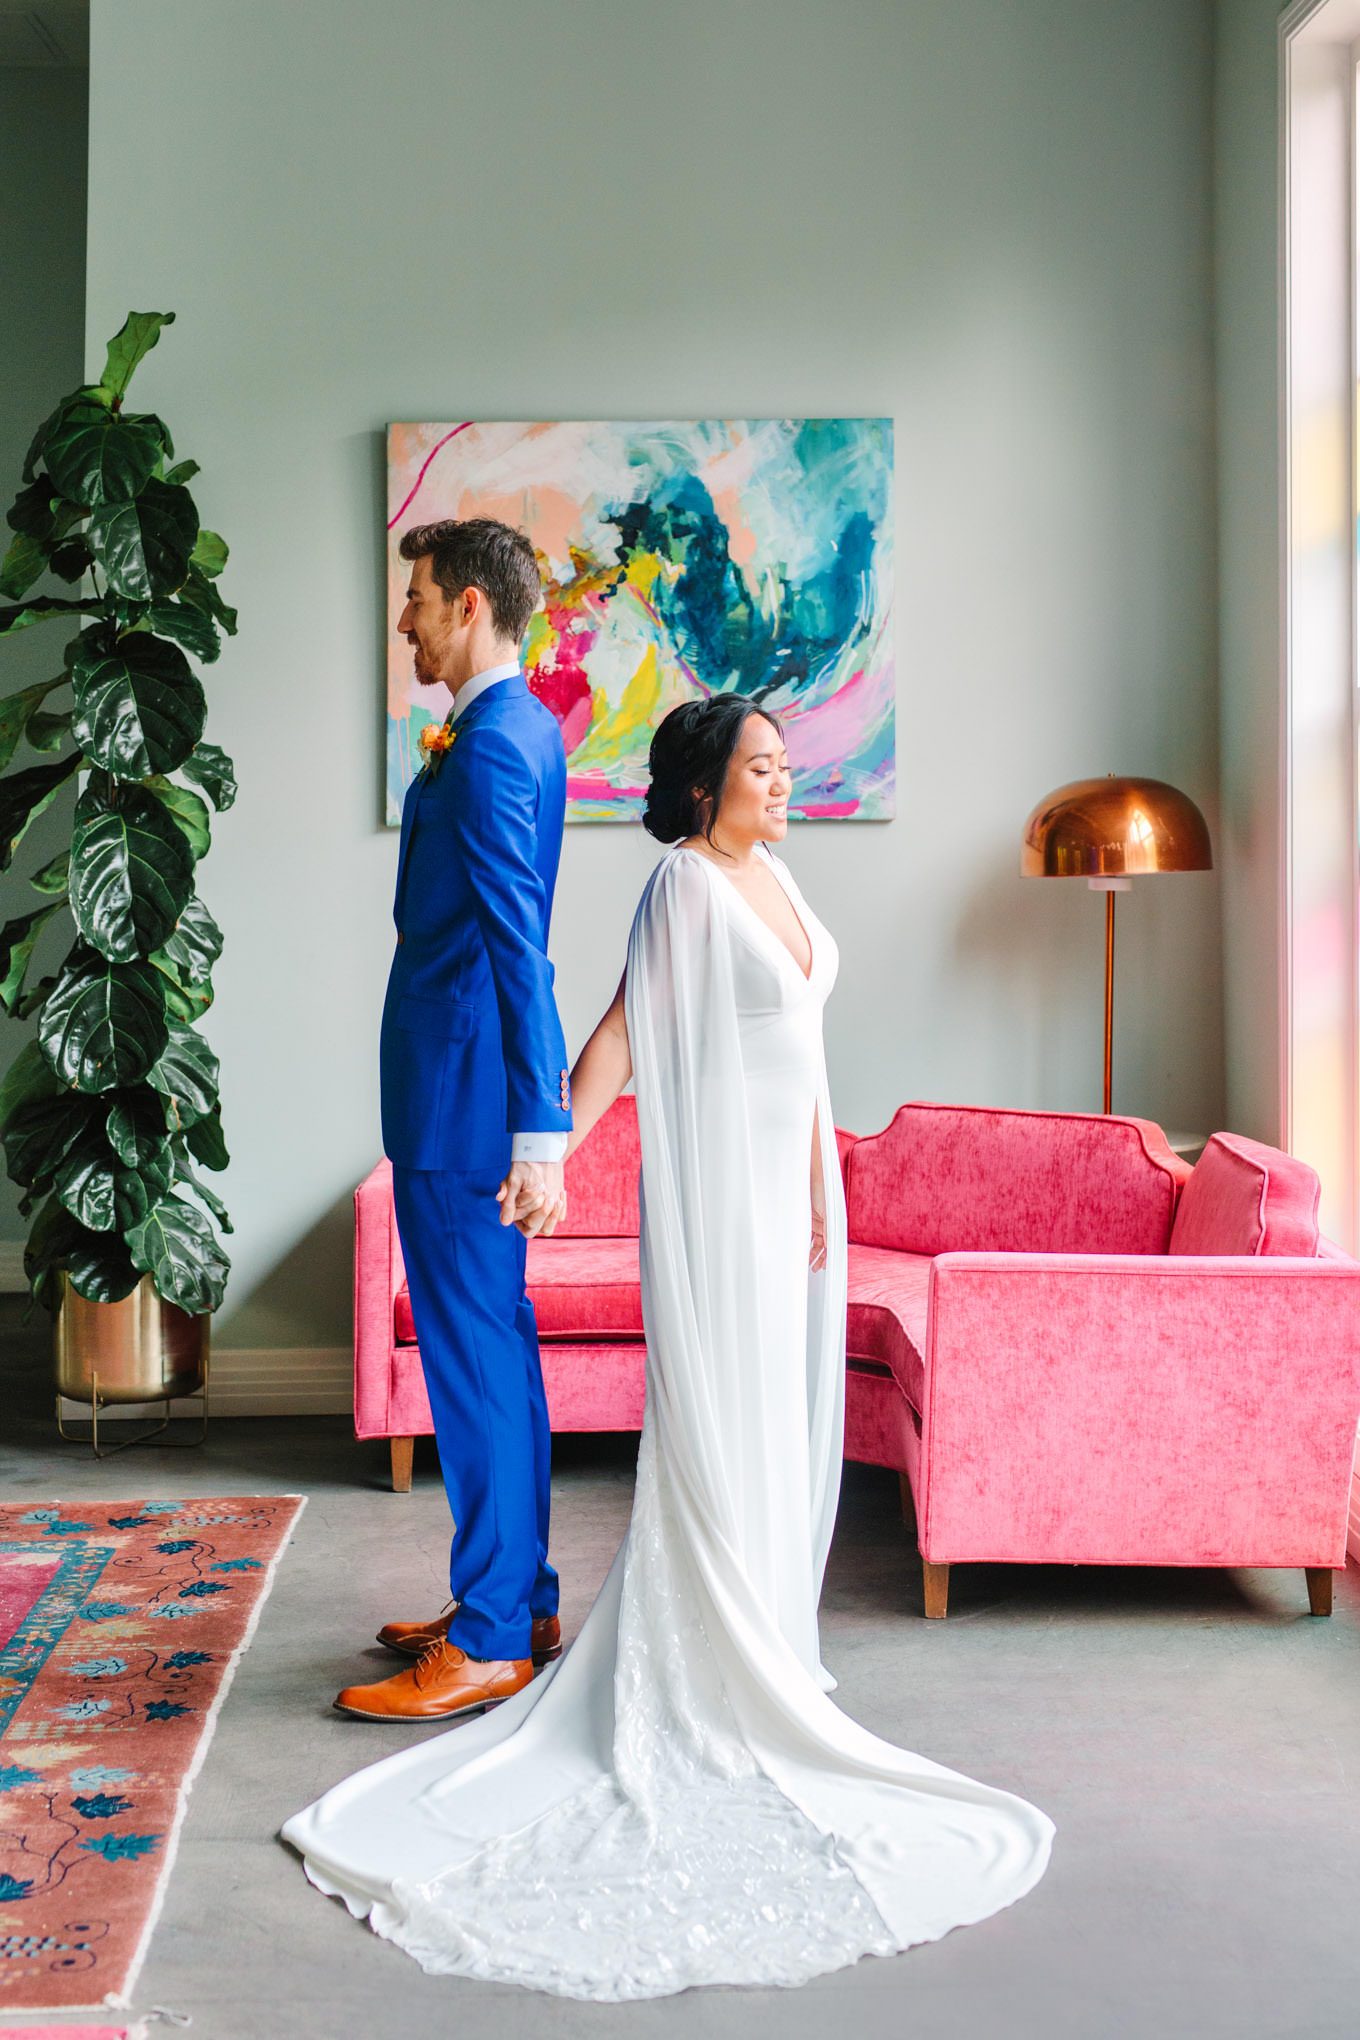 Bride and groom first look | TV inspired wedding at The Fig House Los Angeles | Published on The Knot | Fresh and colorful photography for fun-loving couples in Southern California | #losangeleswedding #TVwedding #colorfulwedding #theknot   Source: Mary Costa Photography | Los Angeles wedding photographer